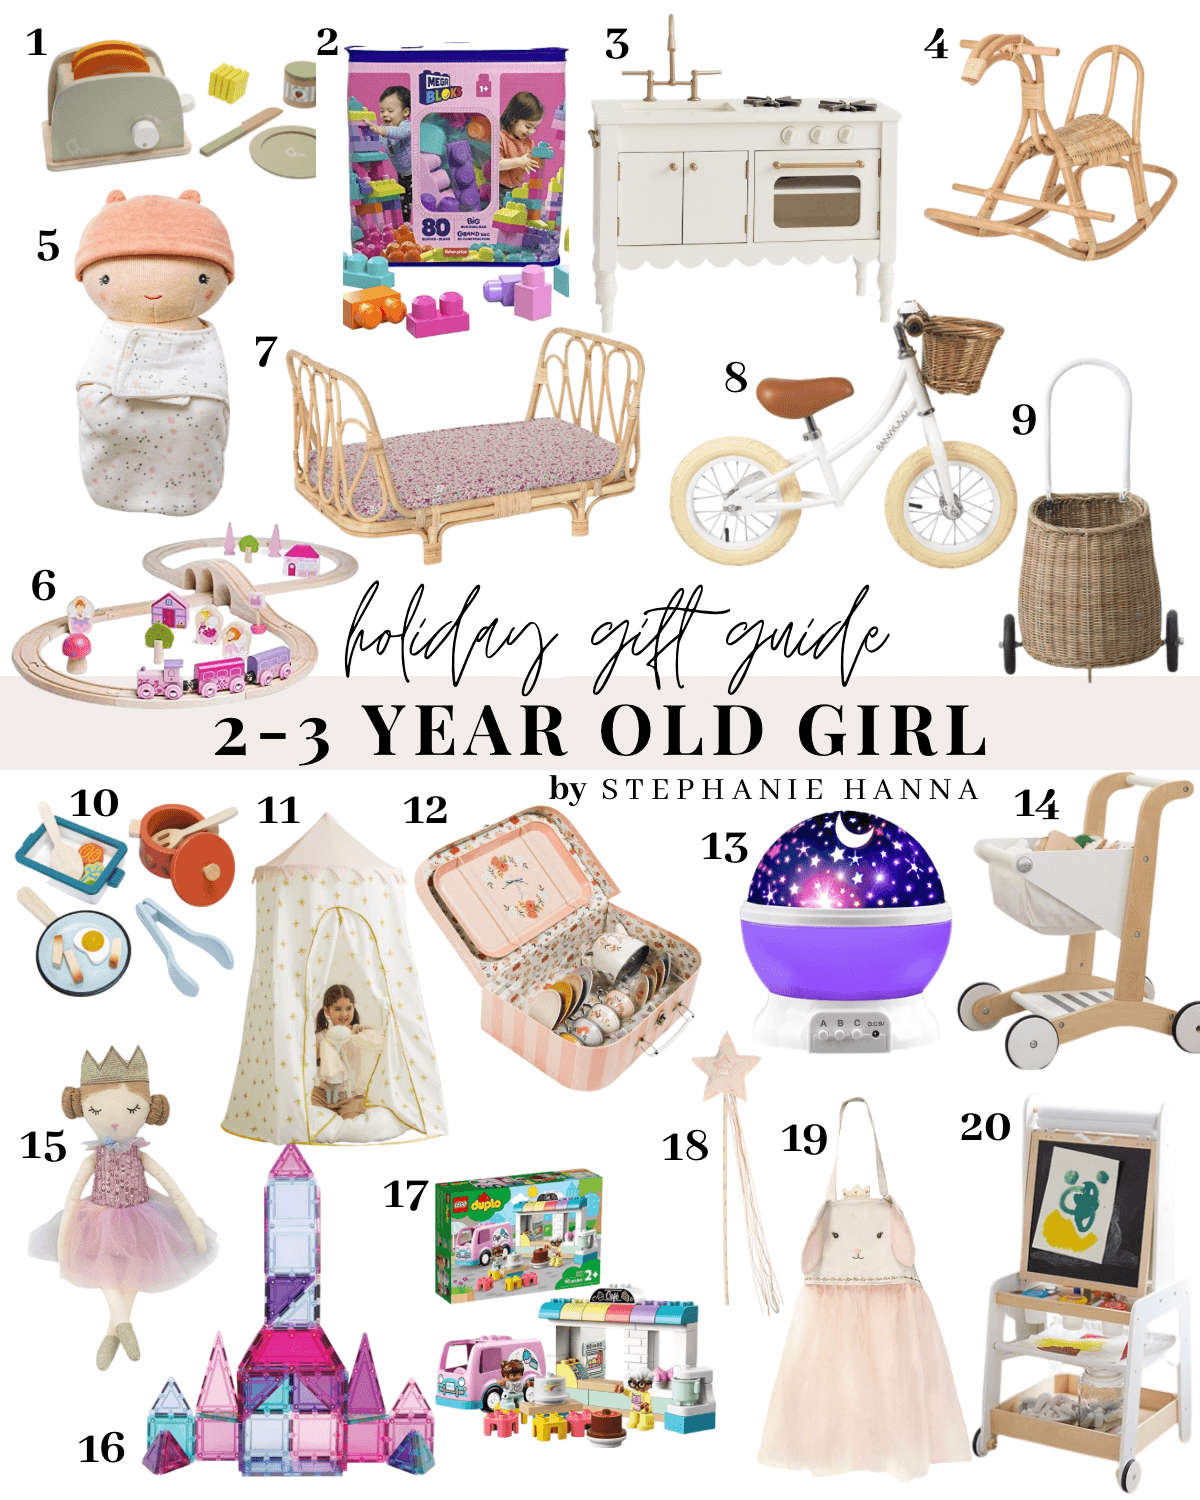 Gifts For 2-3 Year Old Girl - Stephanie Hanna Blog